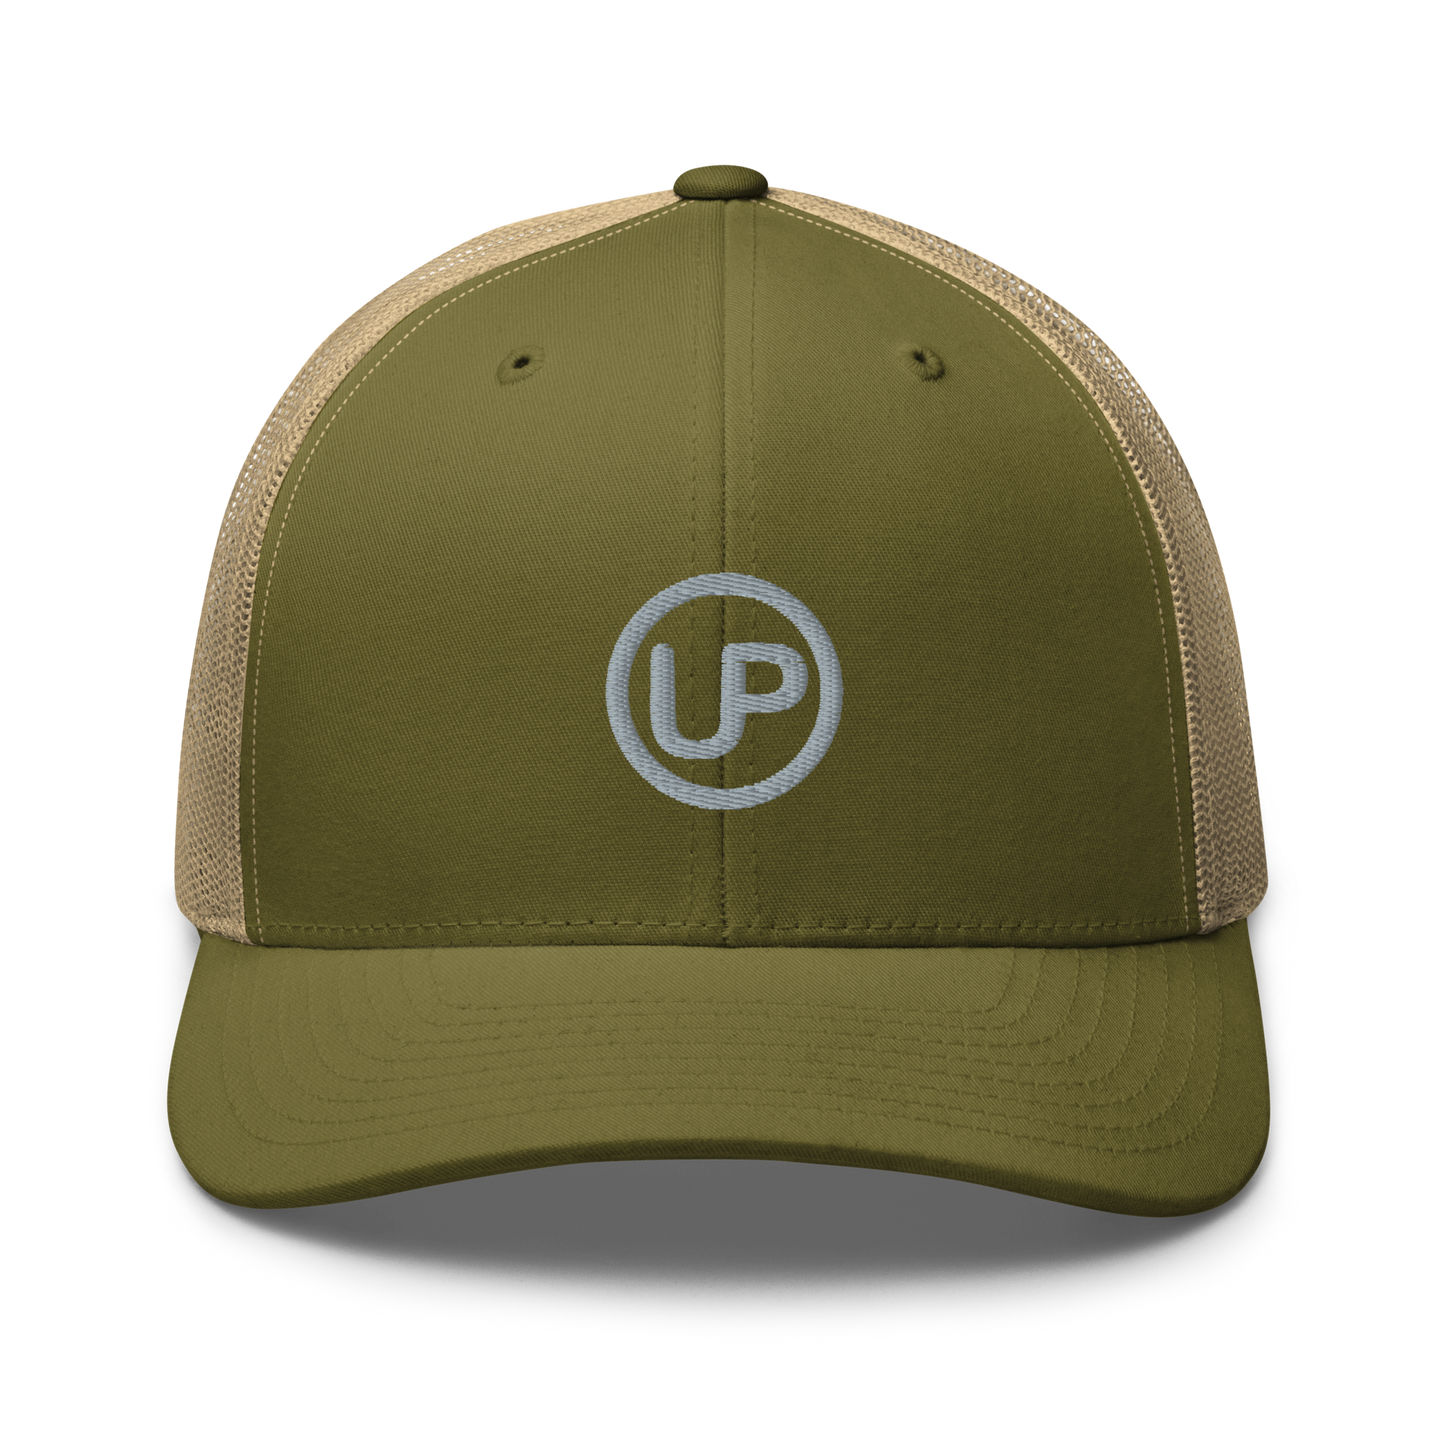 Up Brands Trucker Cap With Large Centered Logo (White Color)